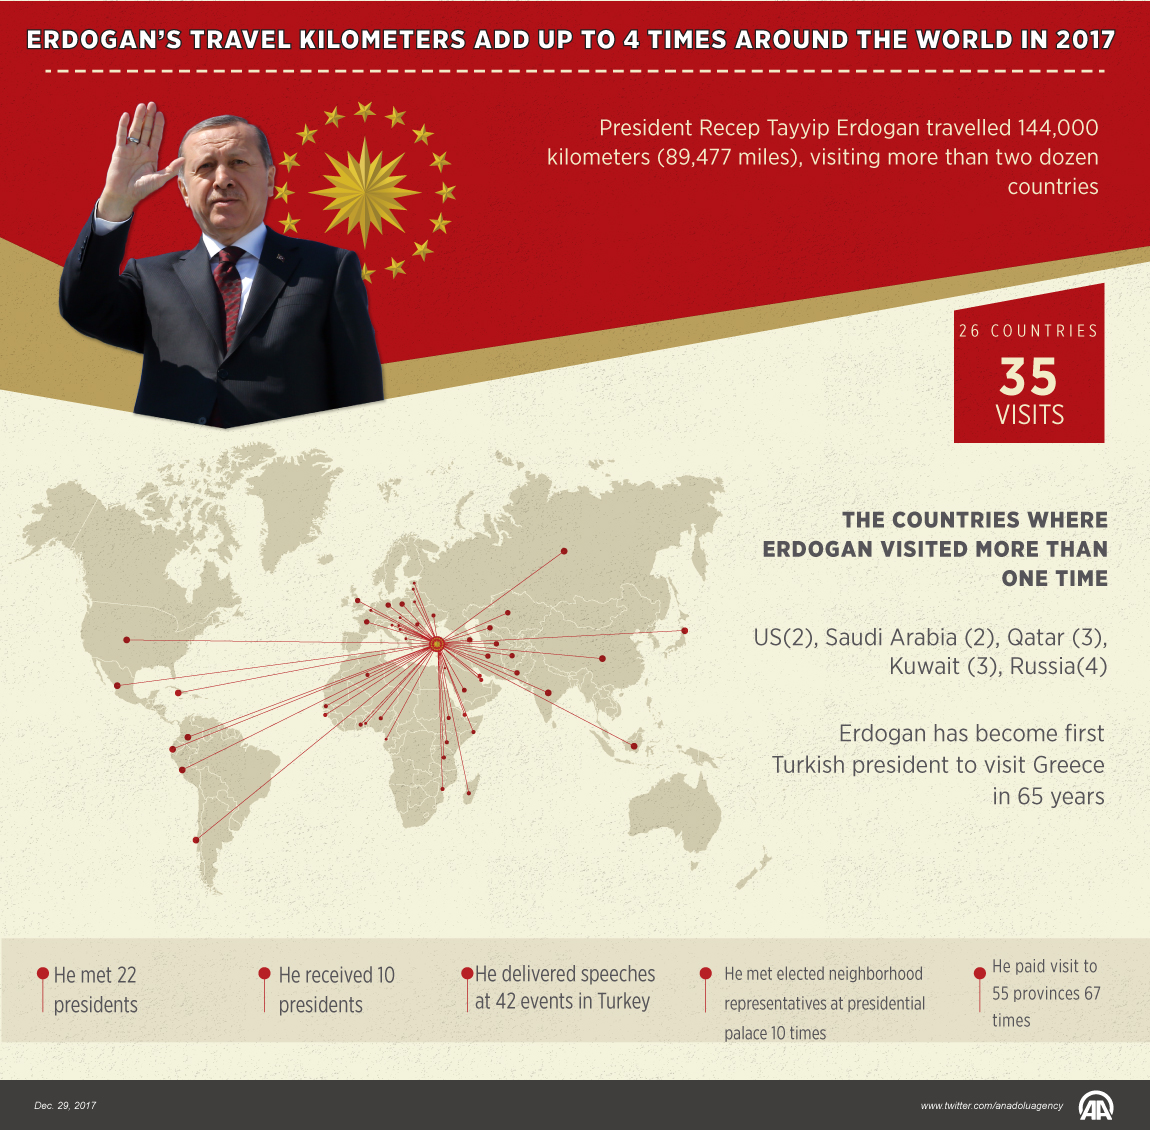 Erdogan's travel kilometers add up to 4 times around the world in 2017